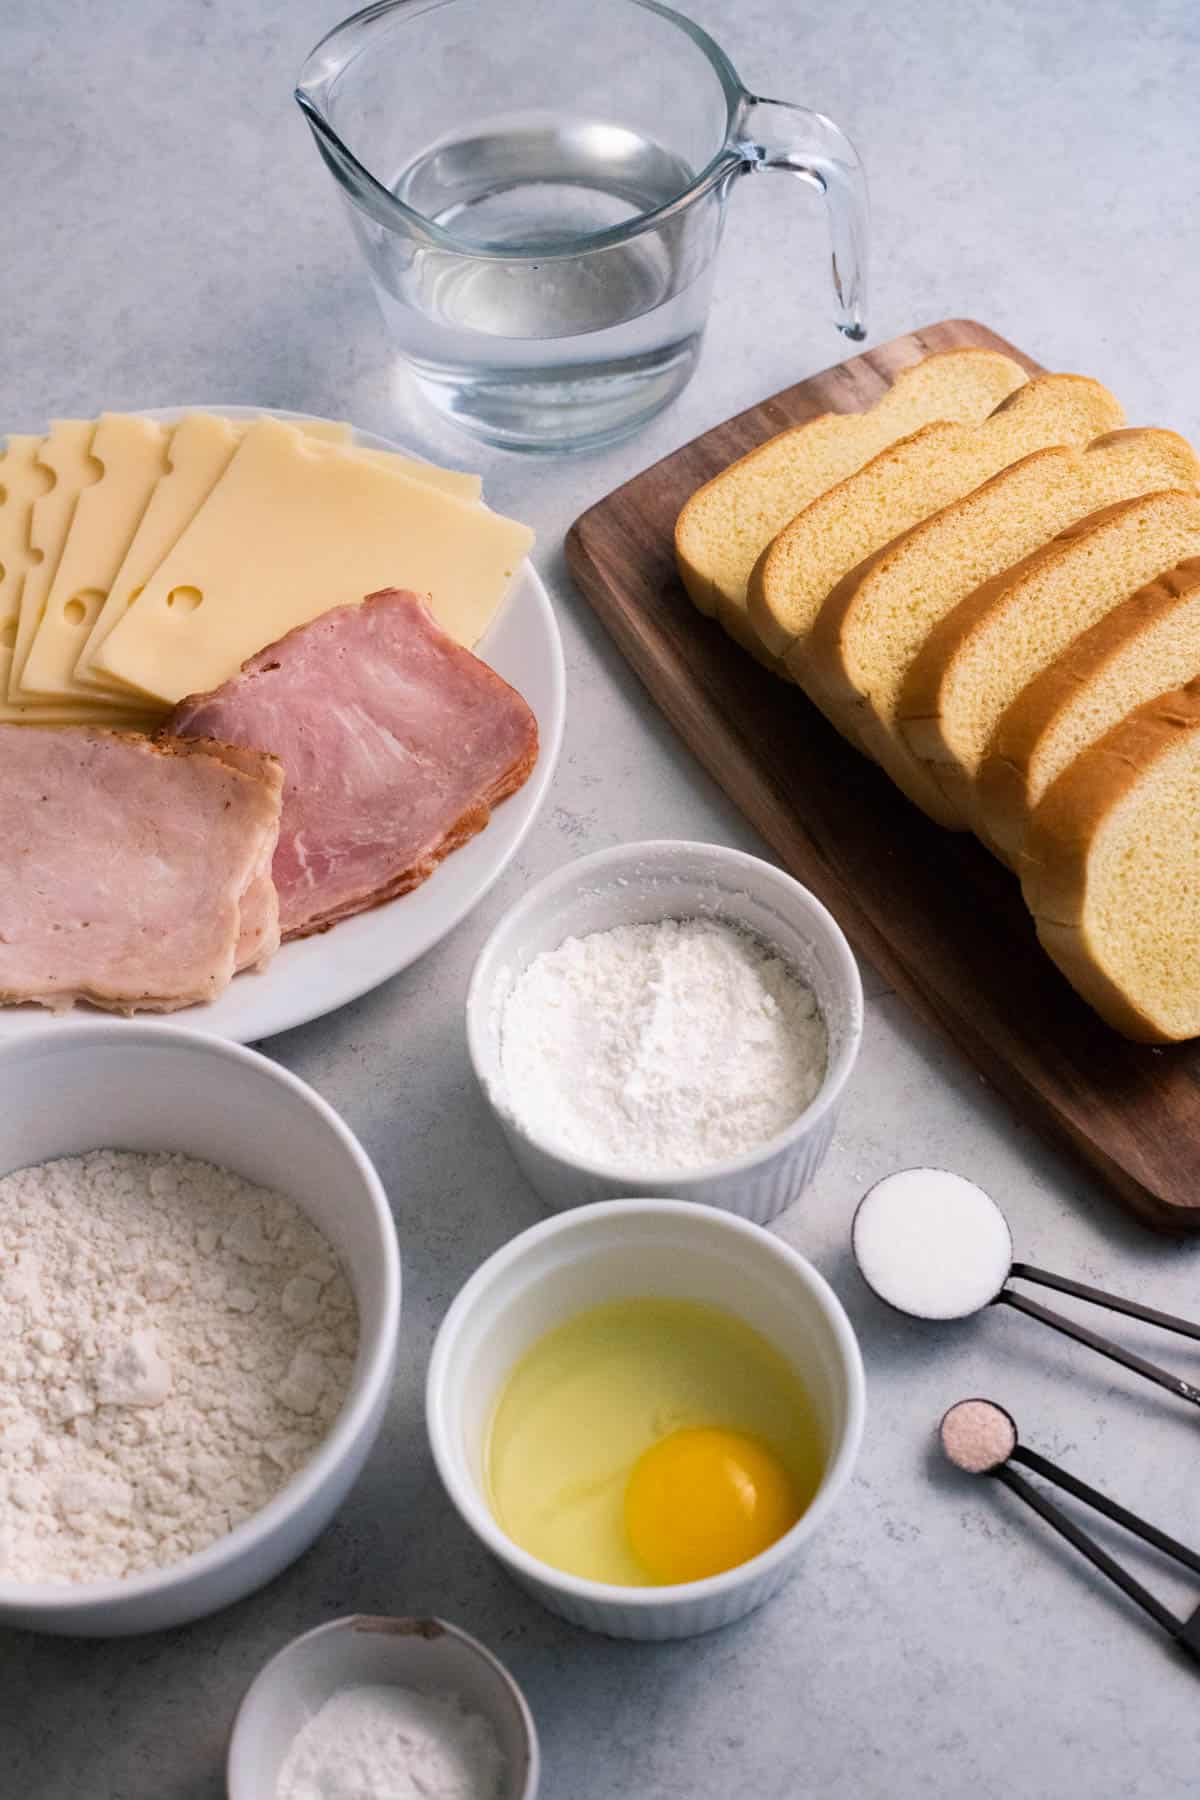 Ingredients laid out for monte cristo sandwich.